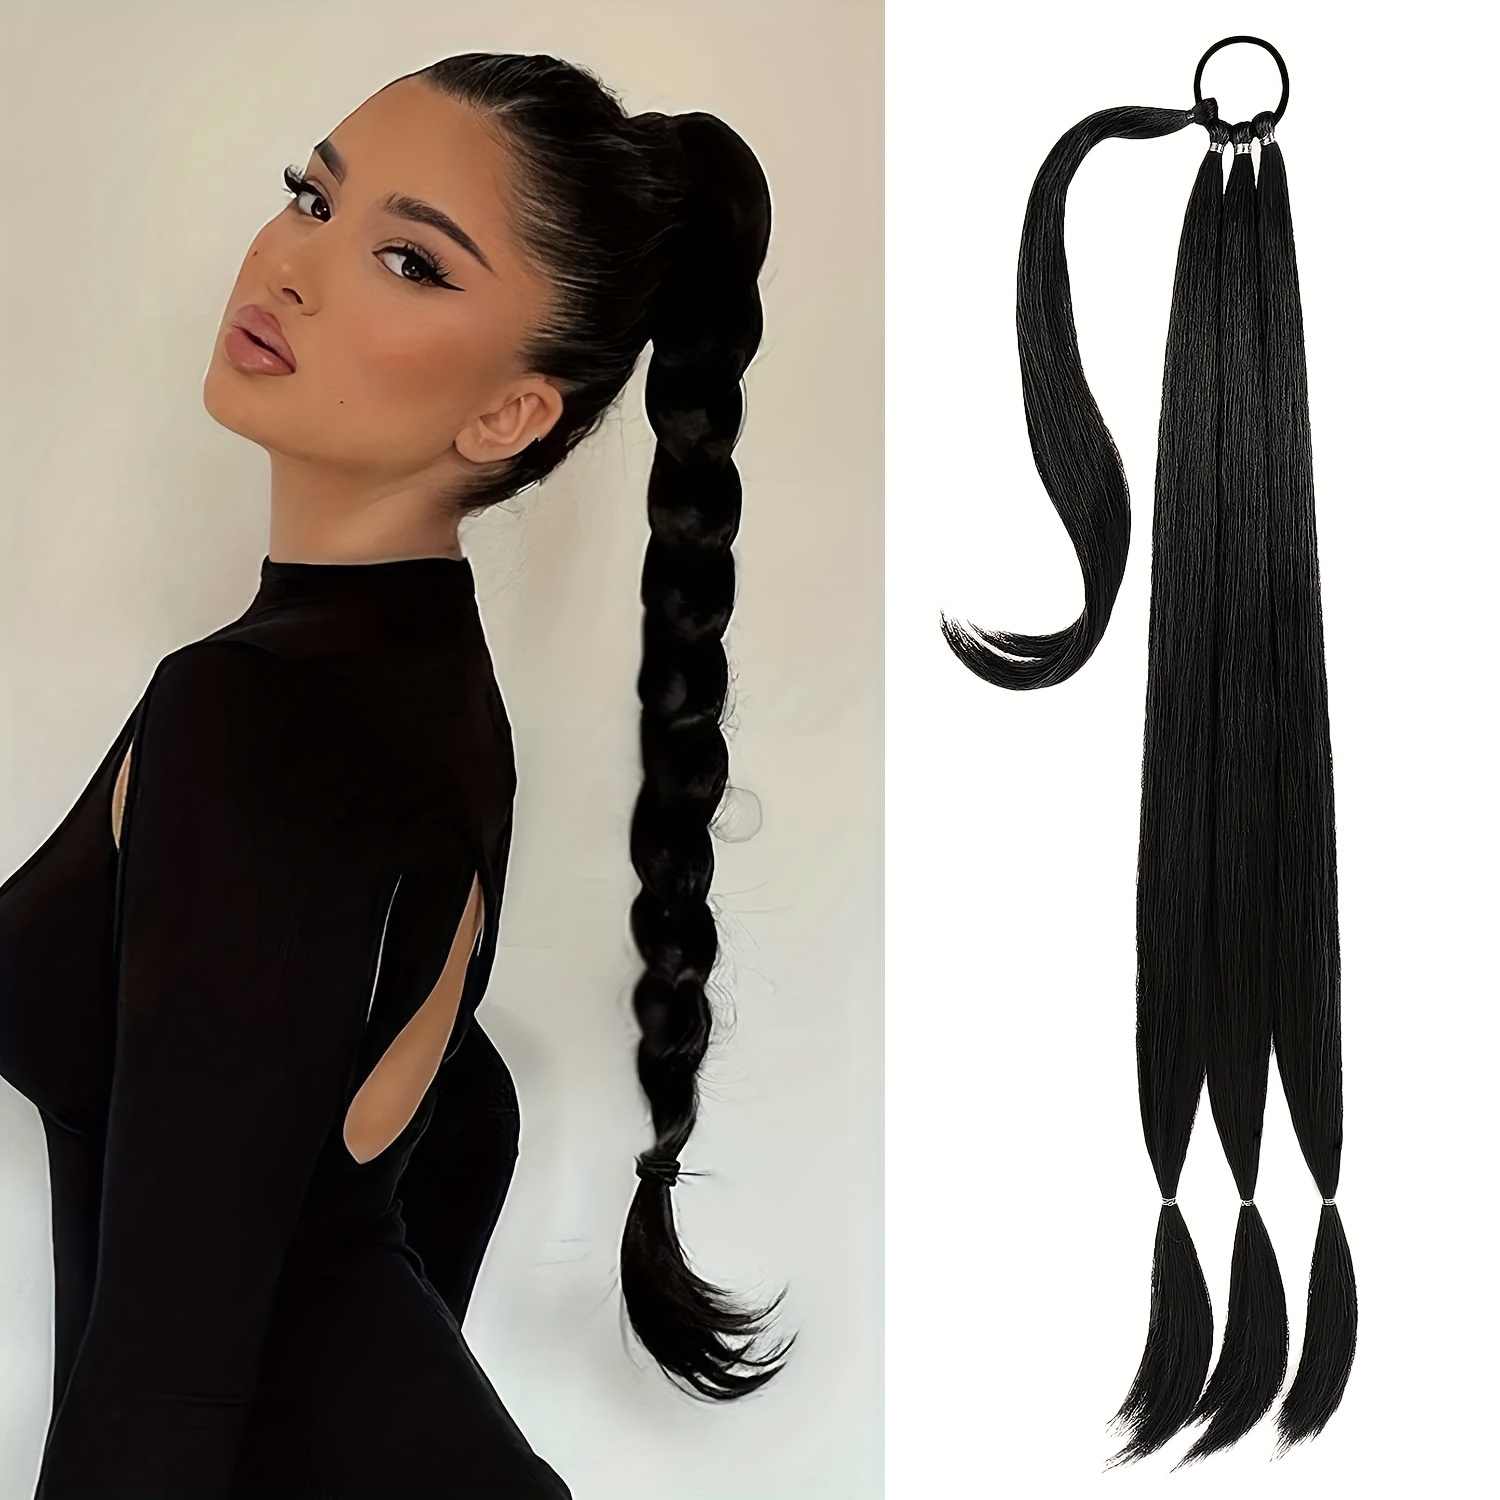 Clip In Ponytail Extension Wrap Around For Women Long Wavy Curly Hair Fluffy  Pony Tail 18 Inch From Divaswigszhouli, $42.97 | DHgate.Com